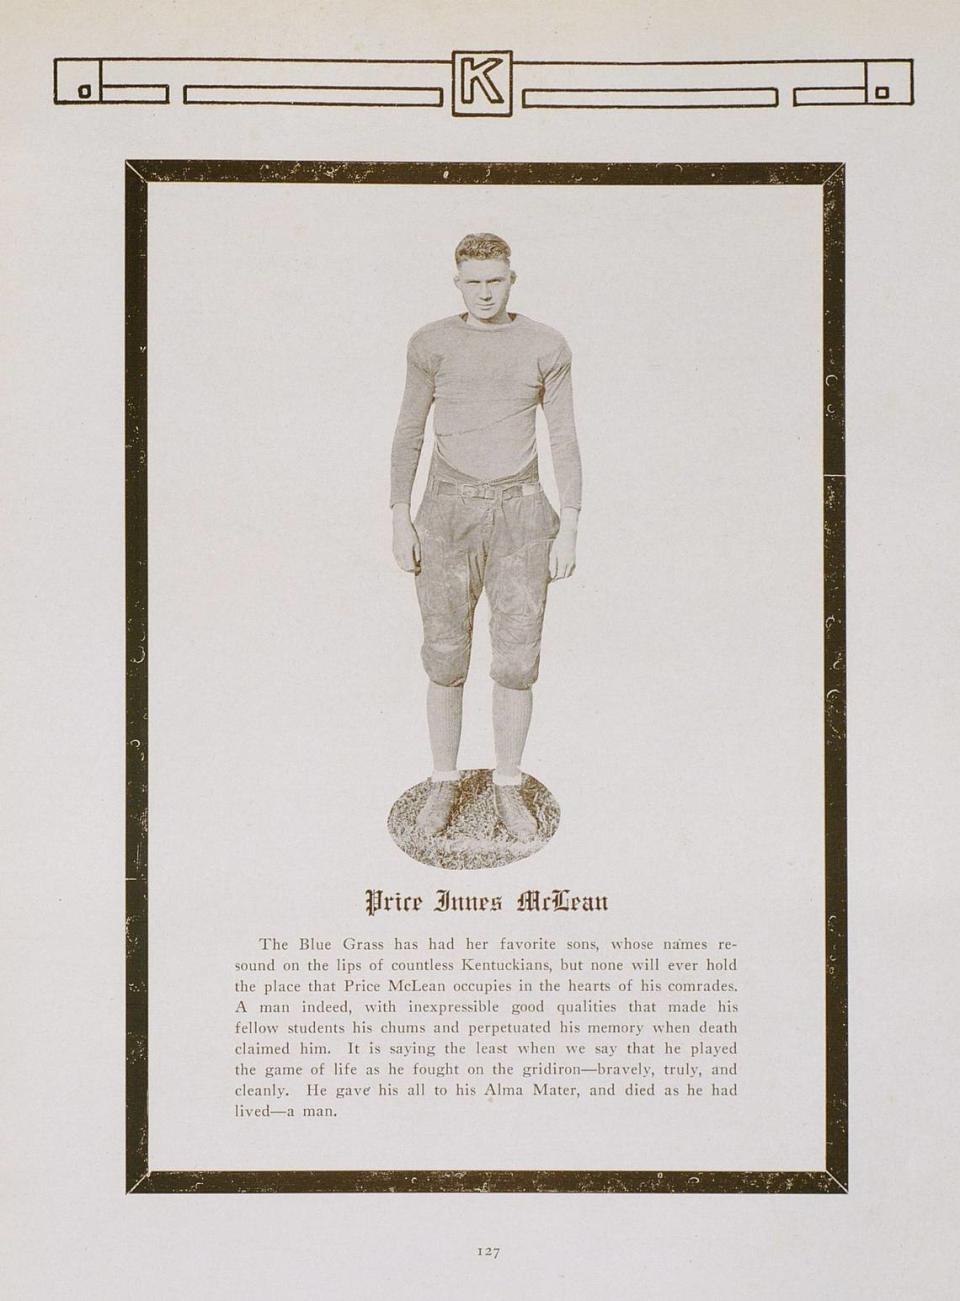 The 1923-24 edition of The Kentuckian yearbook paid tribute to UK football player Price McLean, who died due to injuries suffered in a 1923 game against Cincinnati.